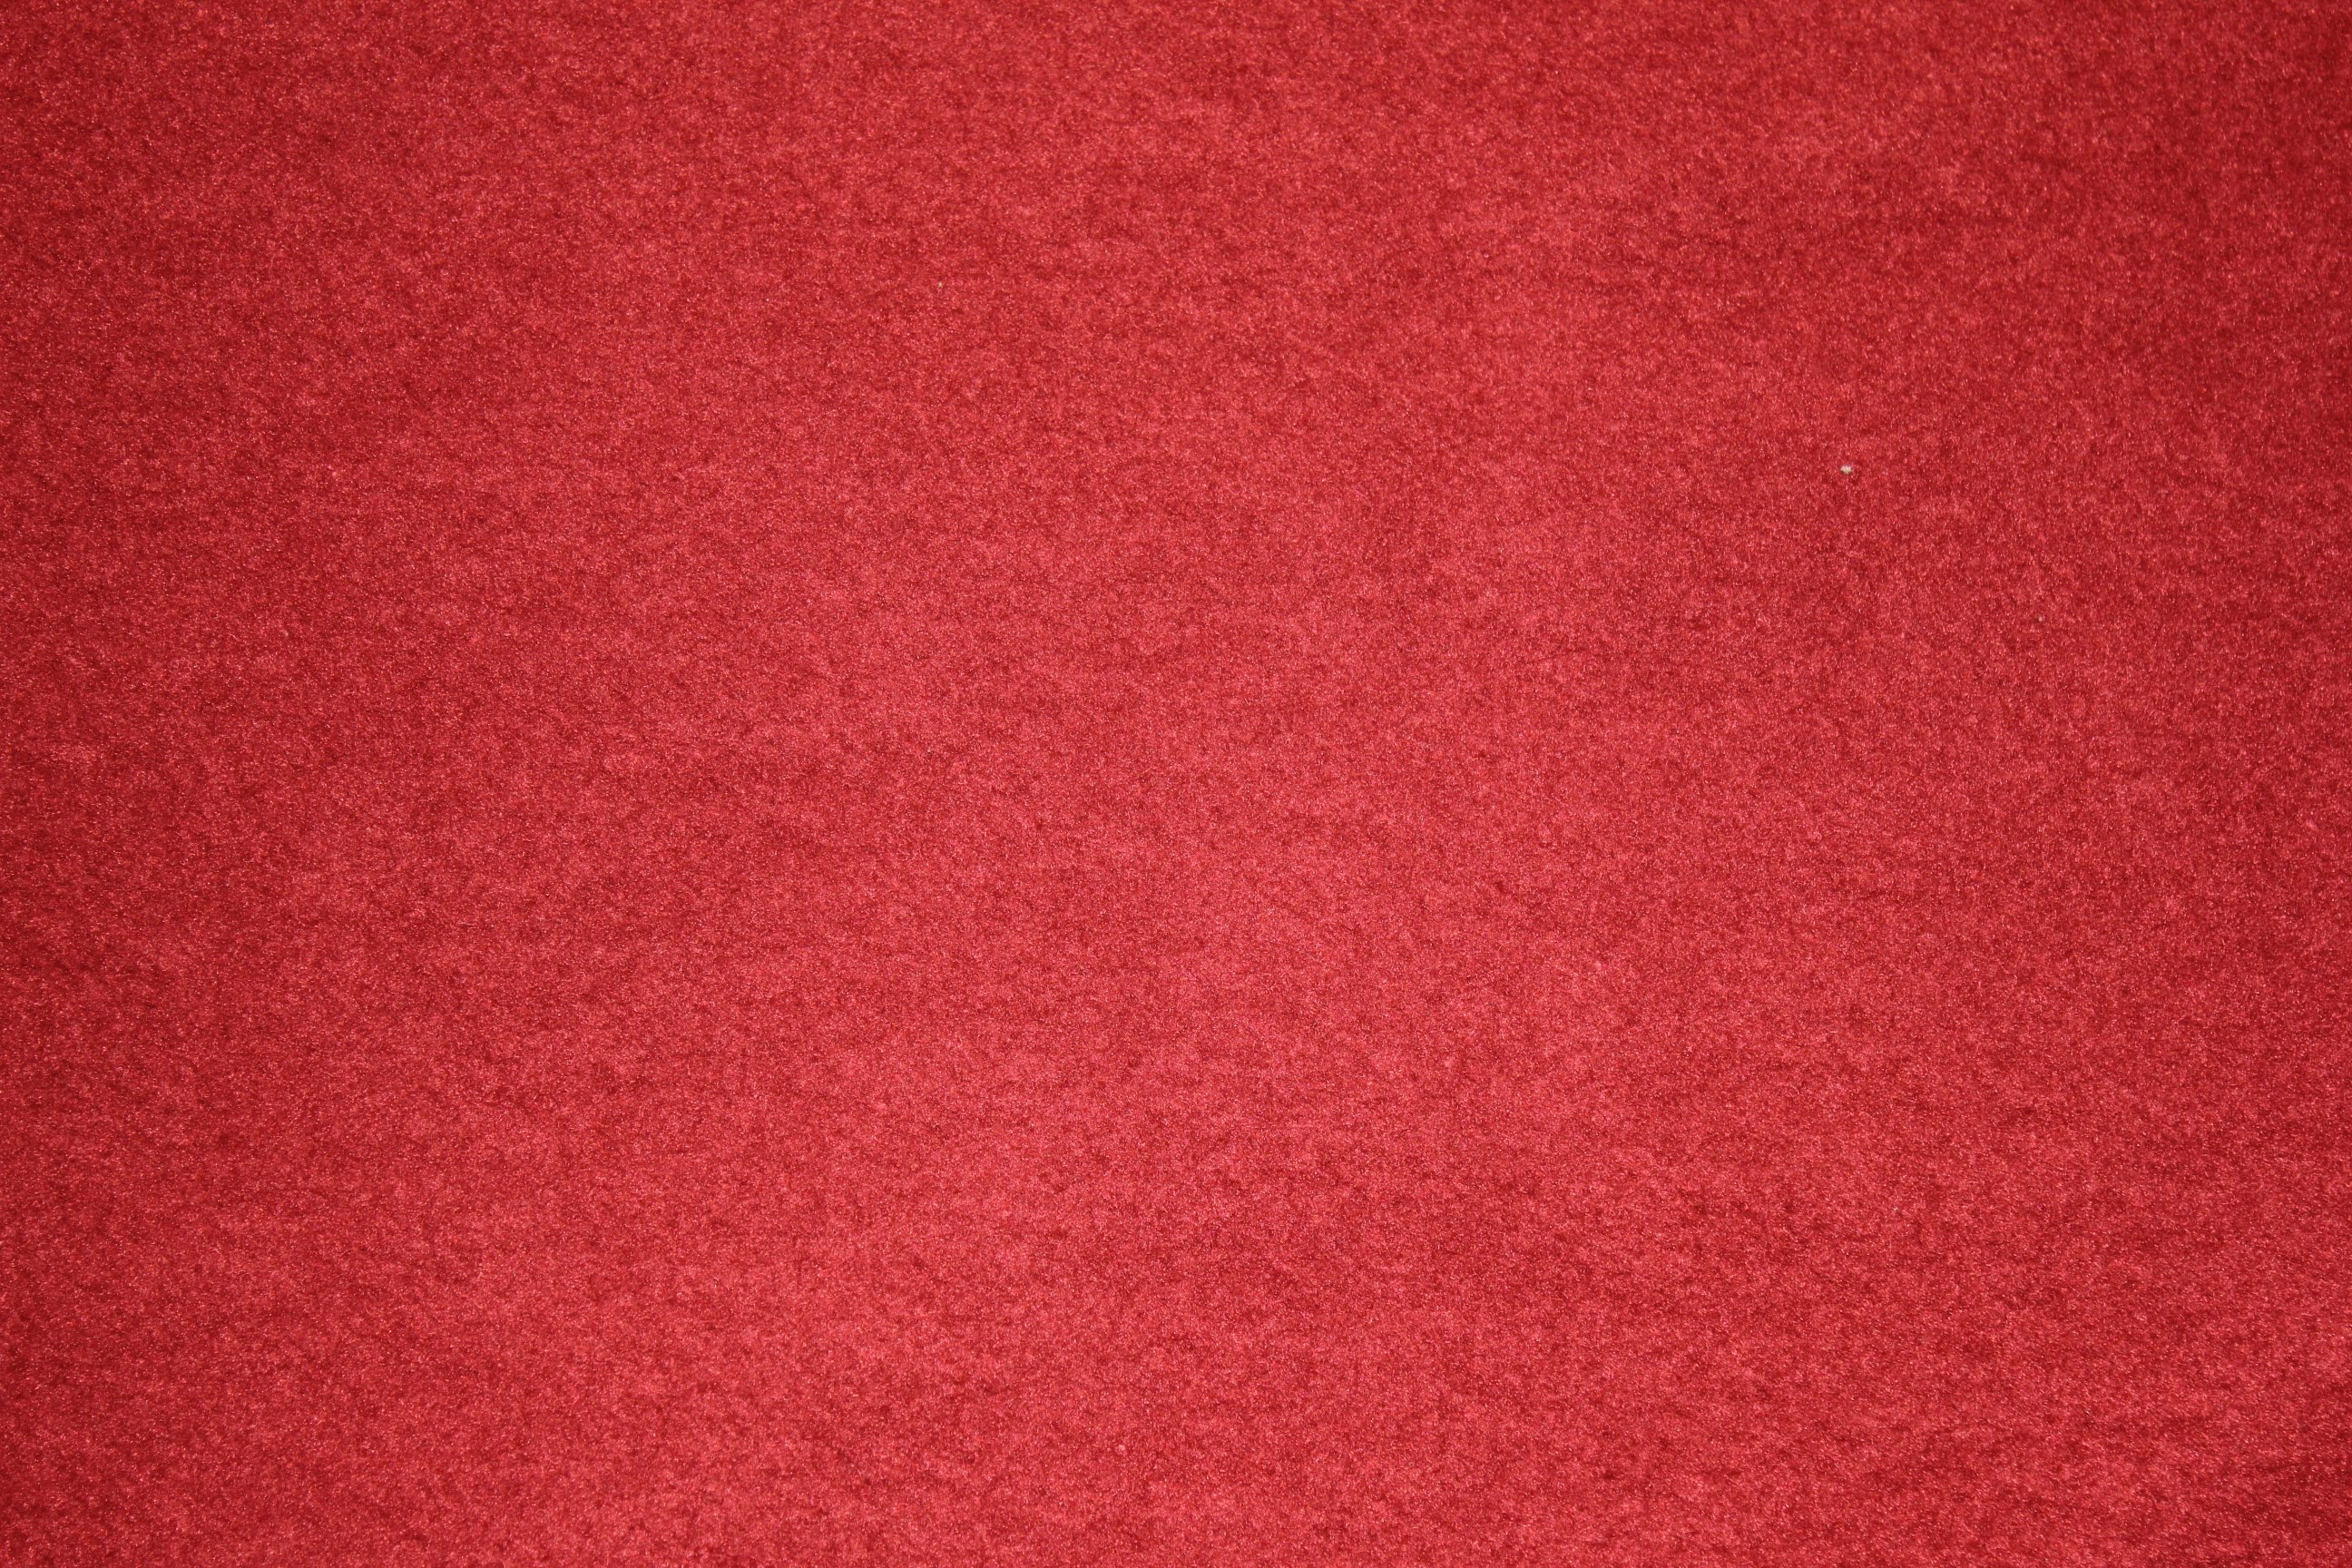 Red Glitter Background Free Stock Photo - Public Domain Pictures